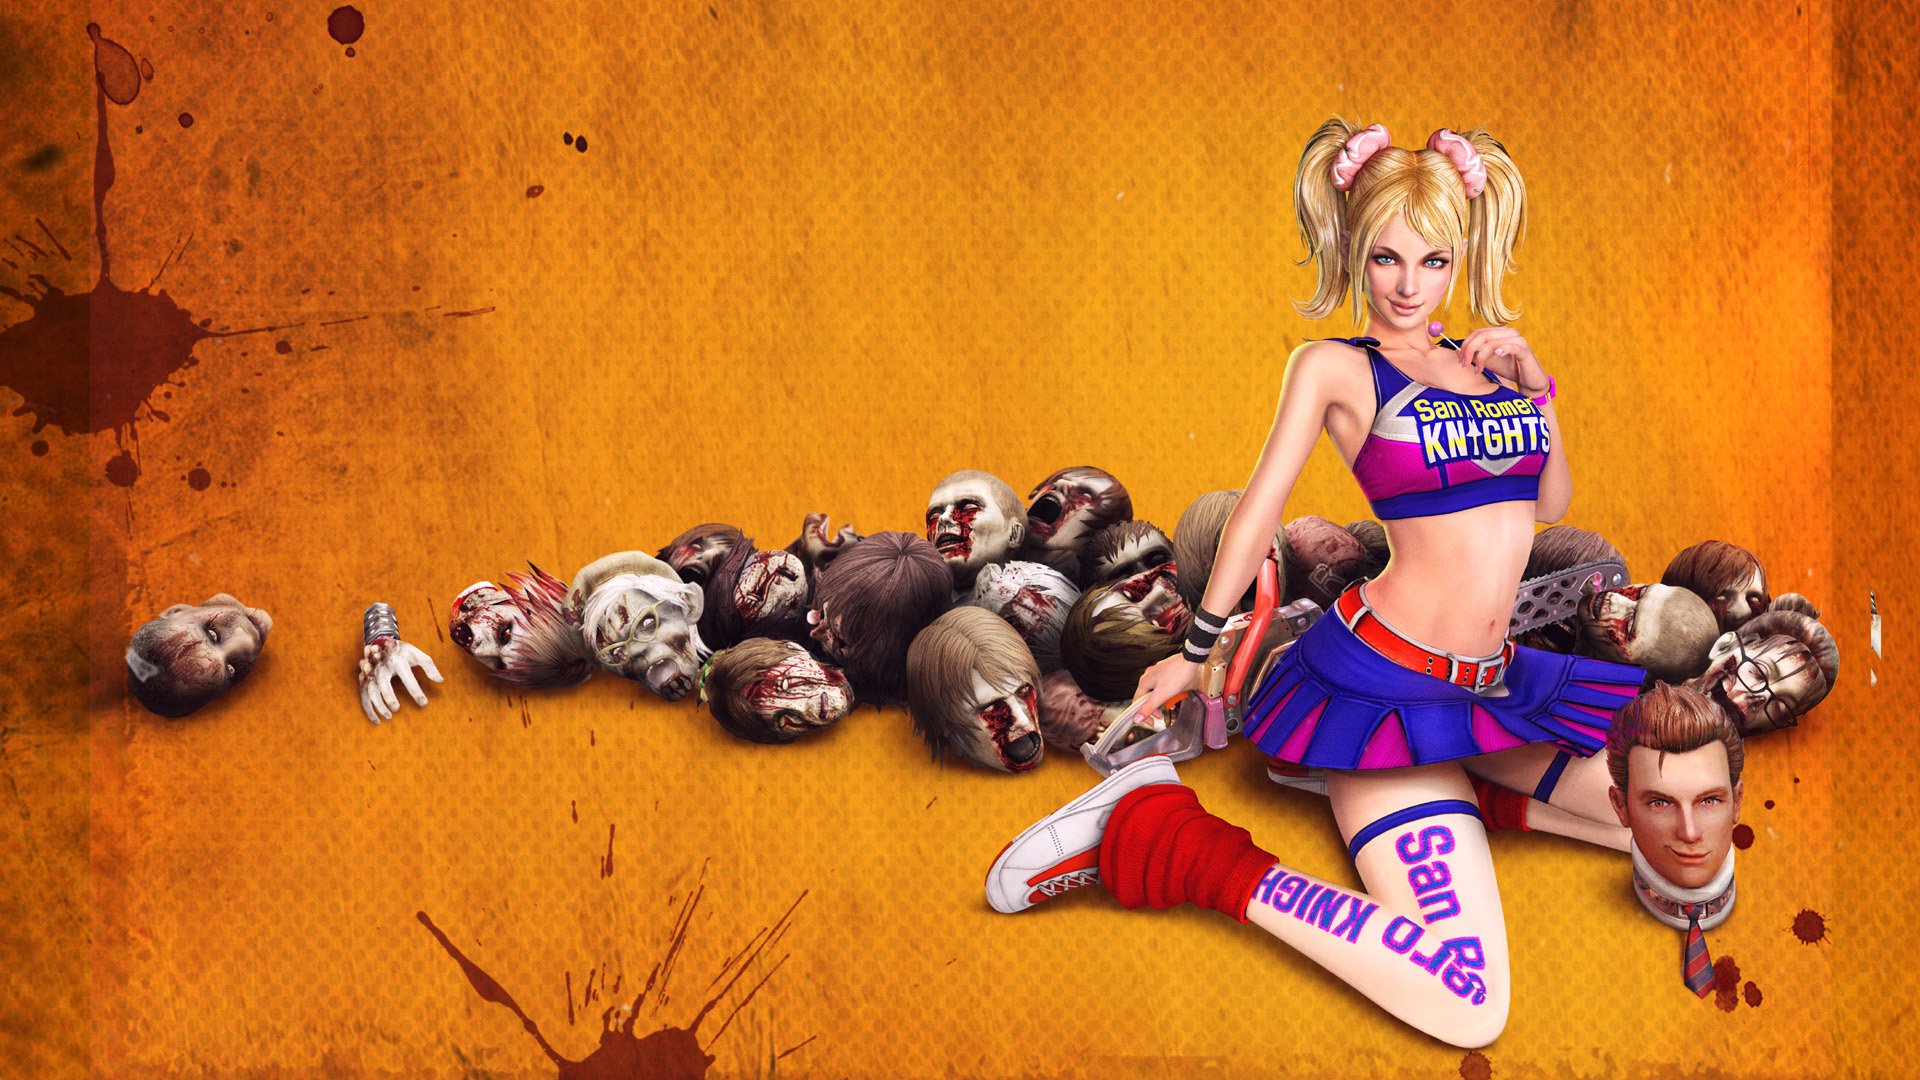 Wallpaper 7 Wallpaper From Lollipop Chainsaw Gamepressure Com Images, Photos, Reviews